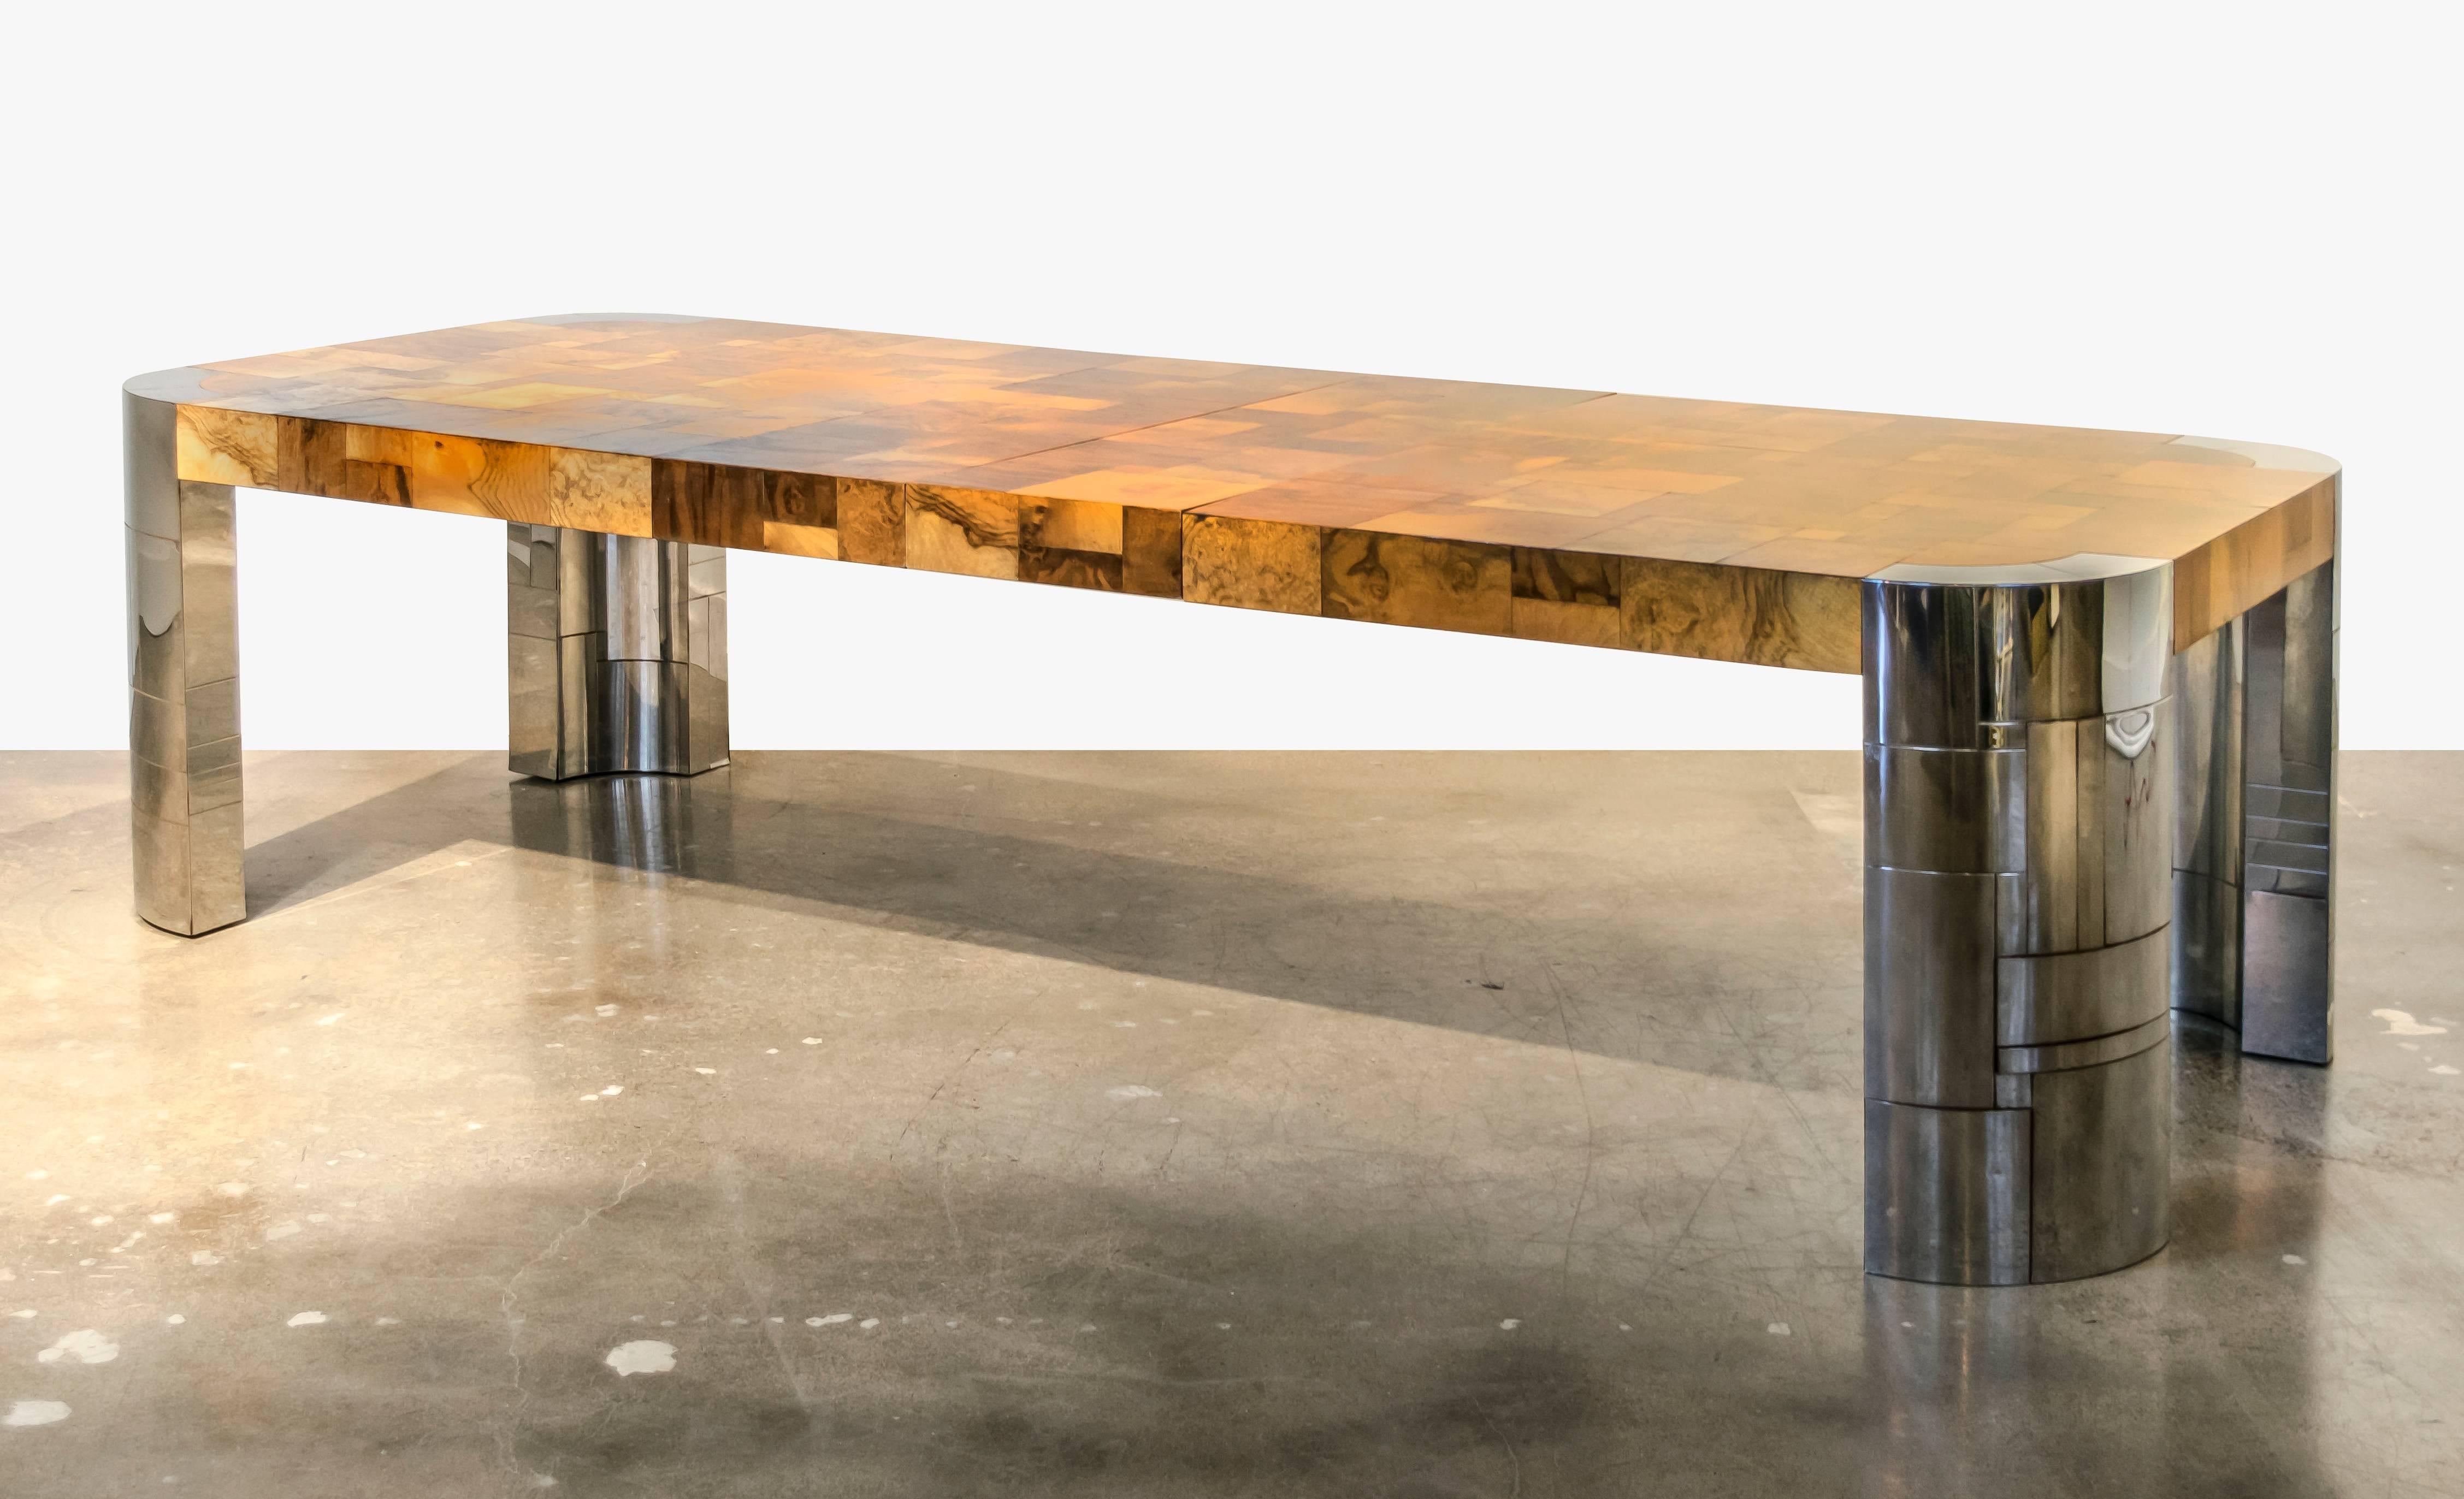 Enormous Paul Evans Cityscape dining table that is signed and manufactured by Directional. Its 7' long without the leaves and a whopping 9'5